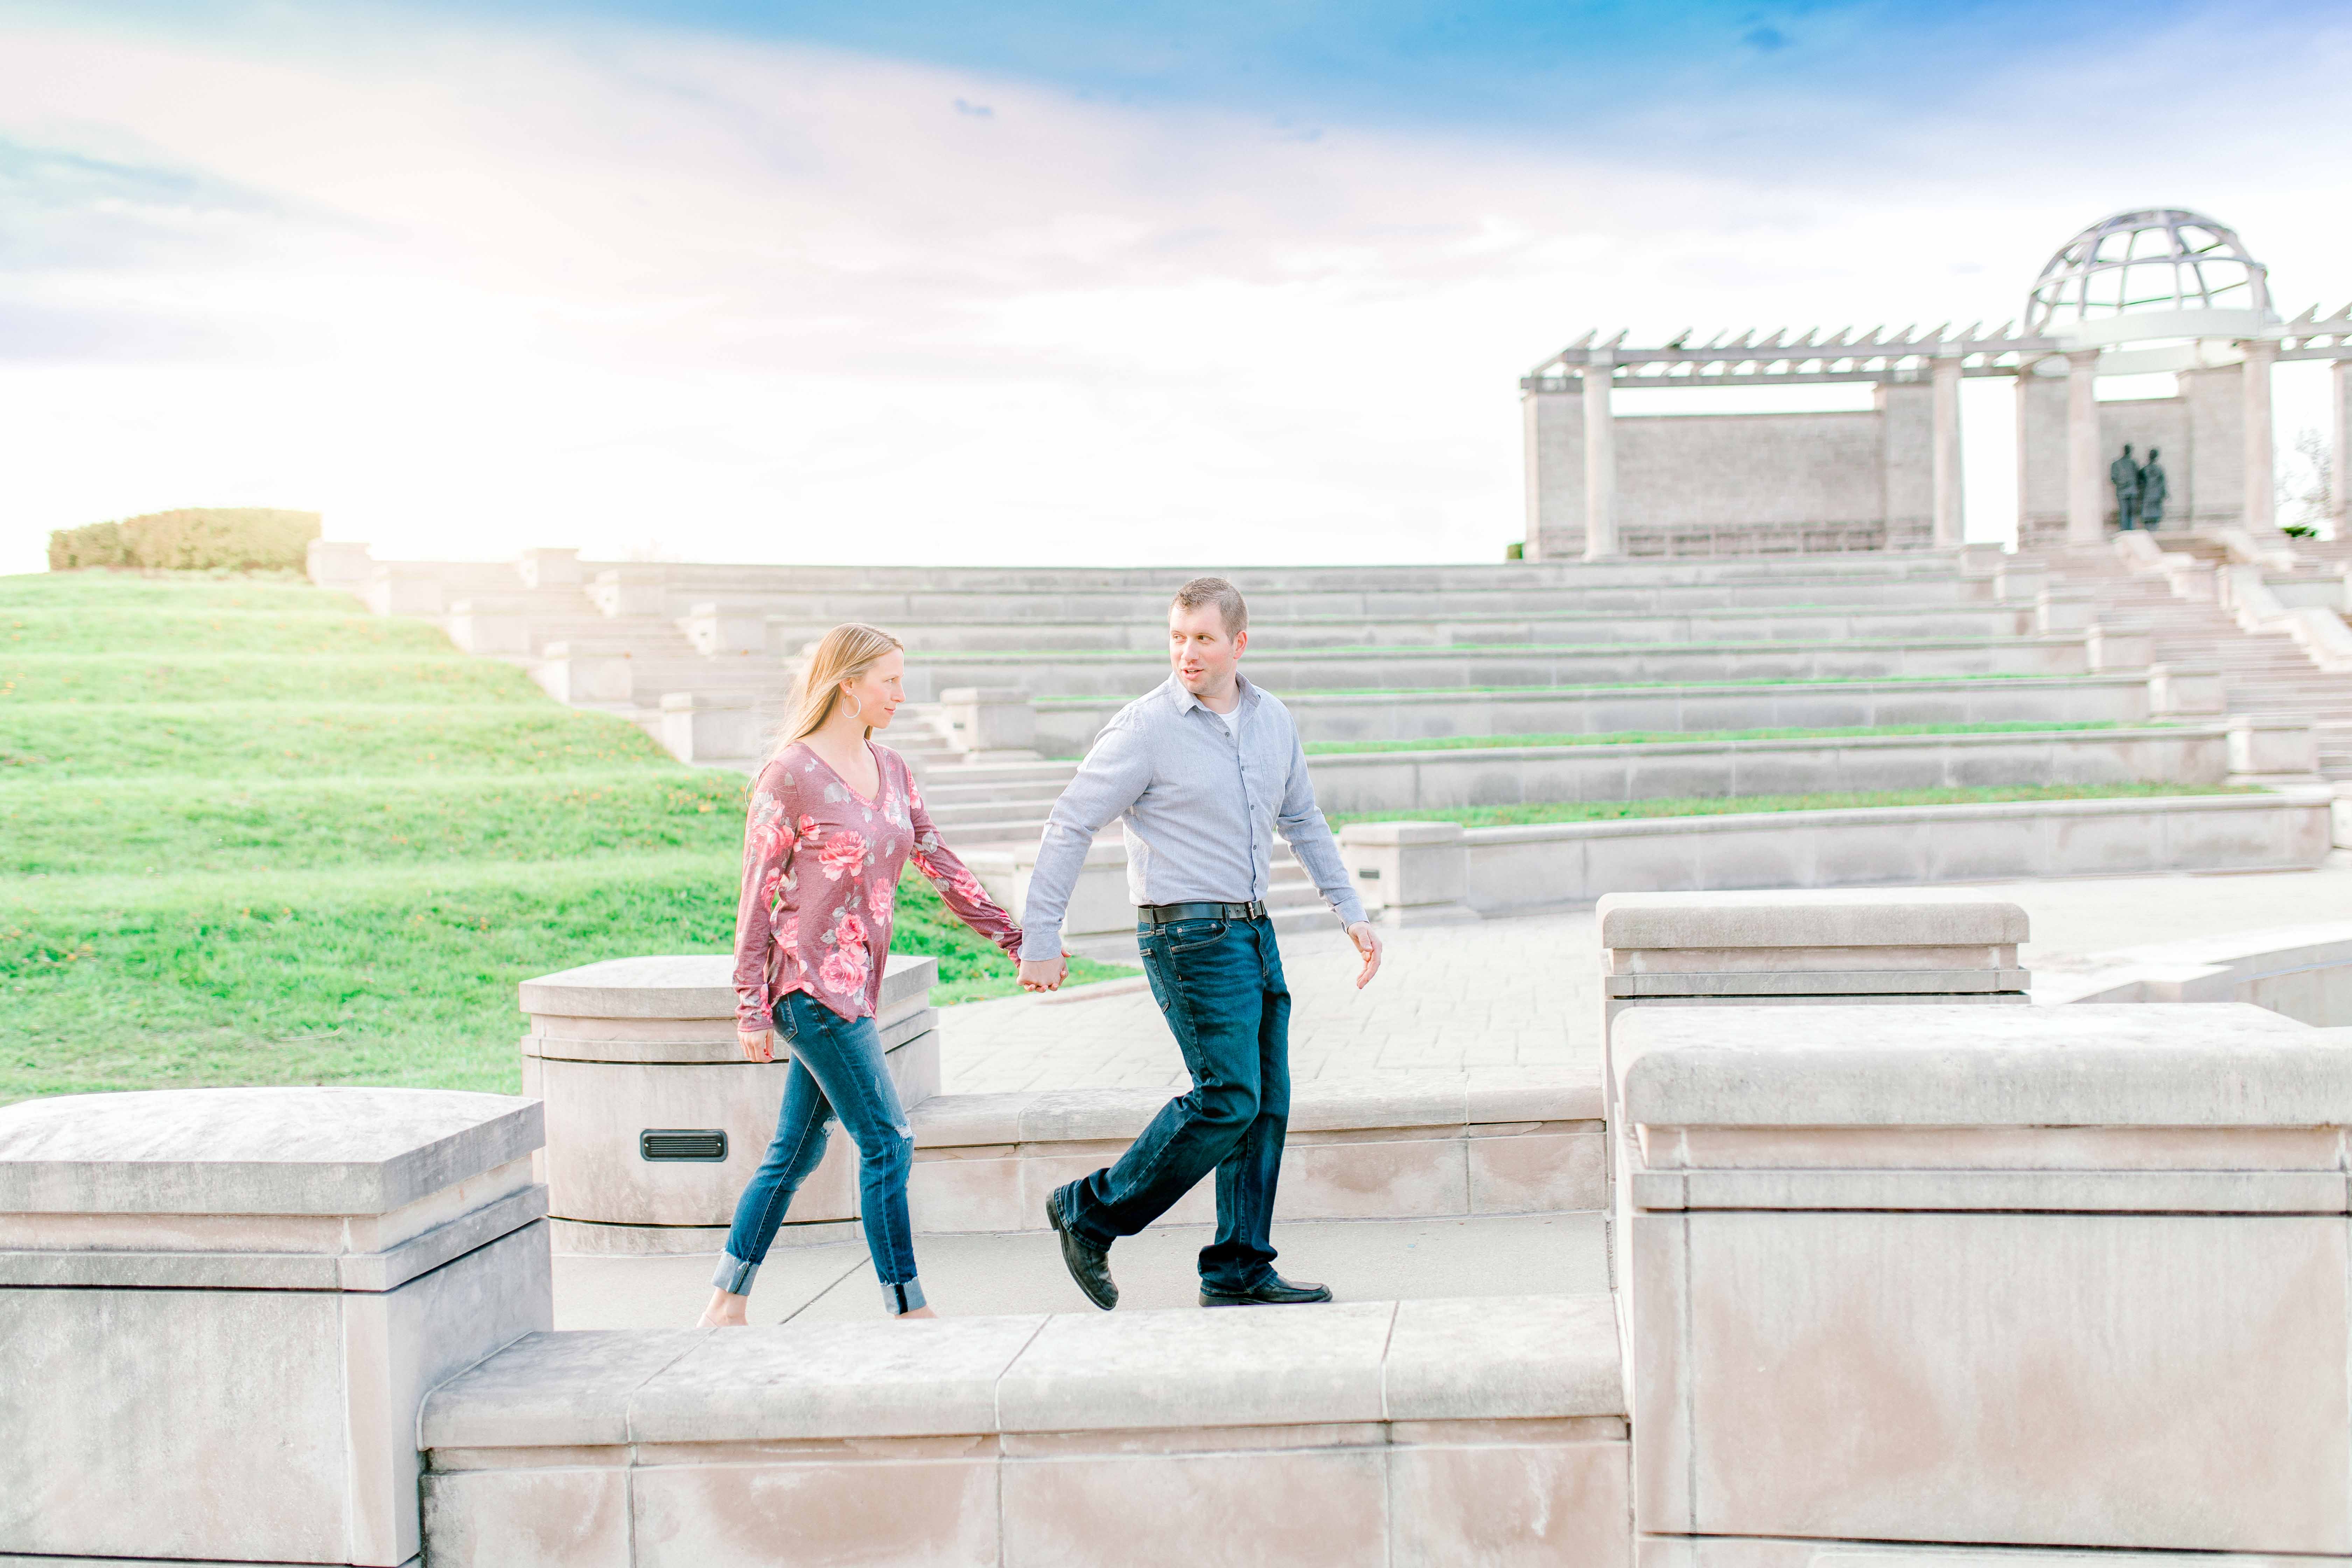 Michelle & Blaine at Coxhall Gardens | Aubrey Lynn Photography | Indianapolis, IN